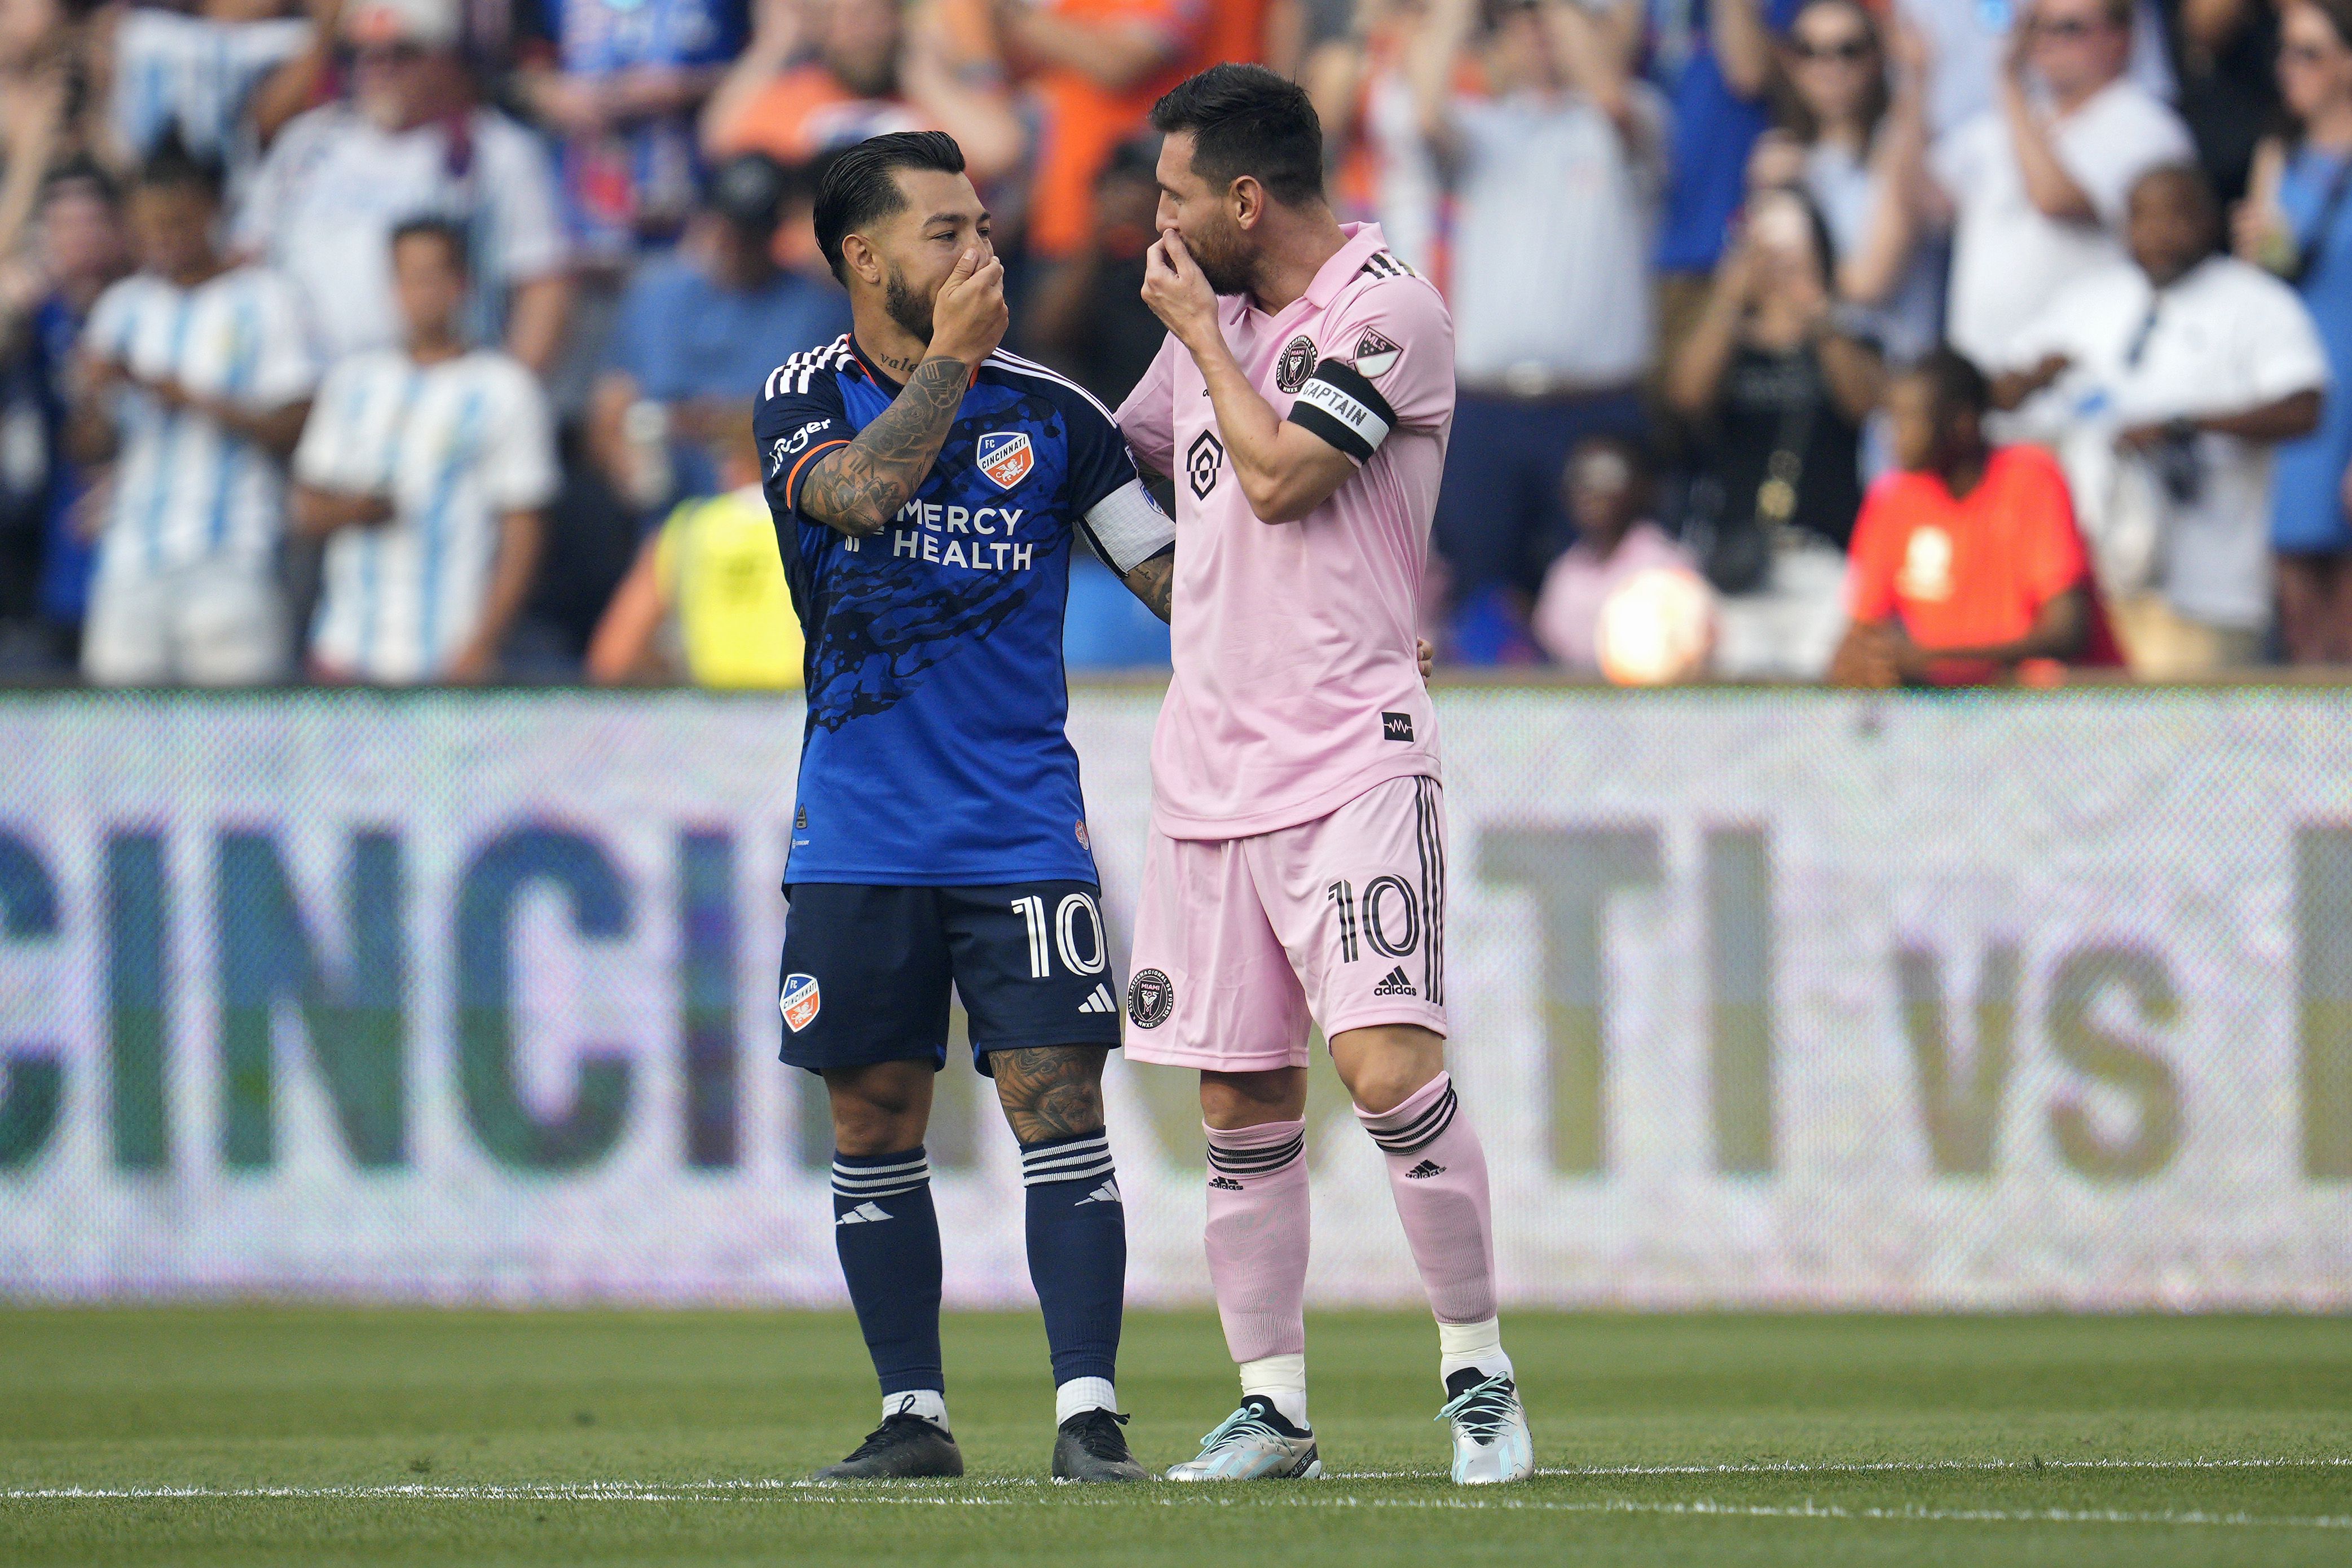 La amistosa charla entre Lionel Messi y Luciano Acosta (Photo by Jeff Dean/USSF/Getty Images for USSF)